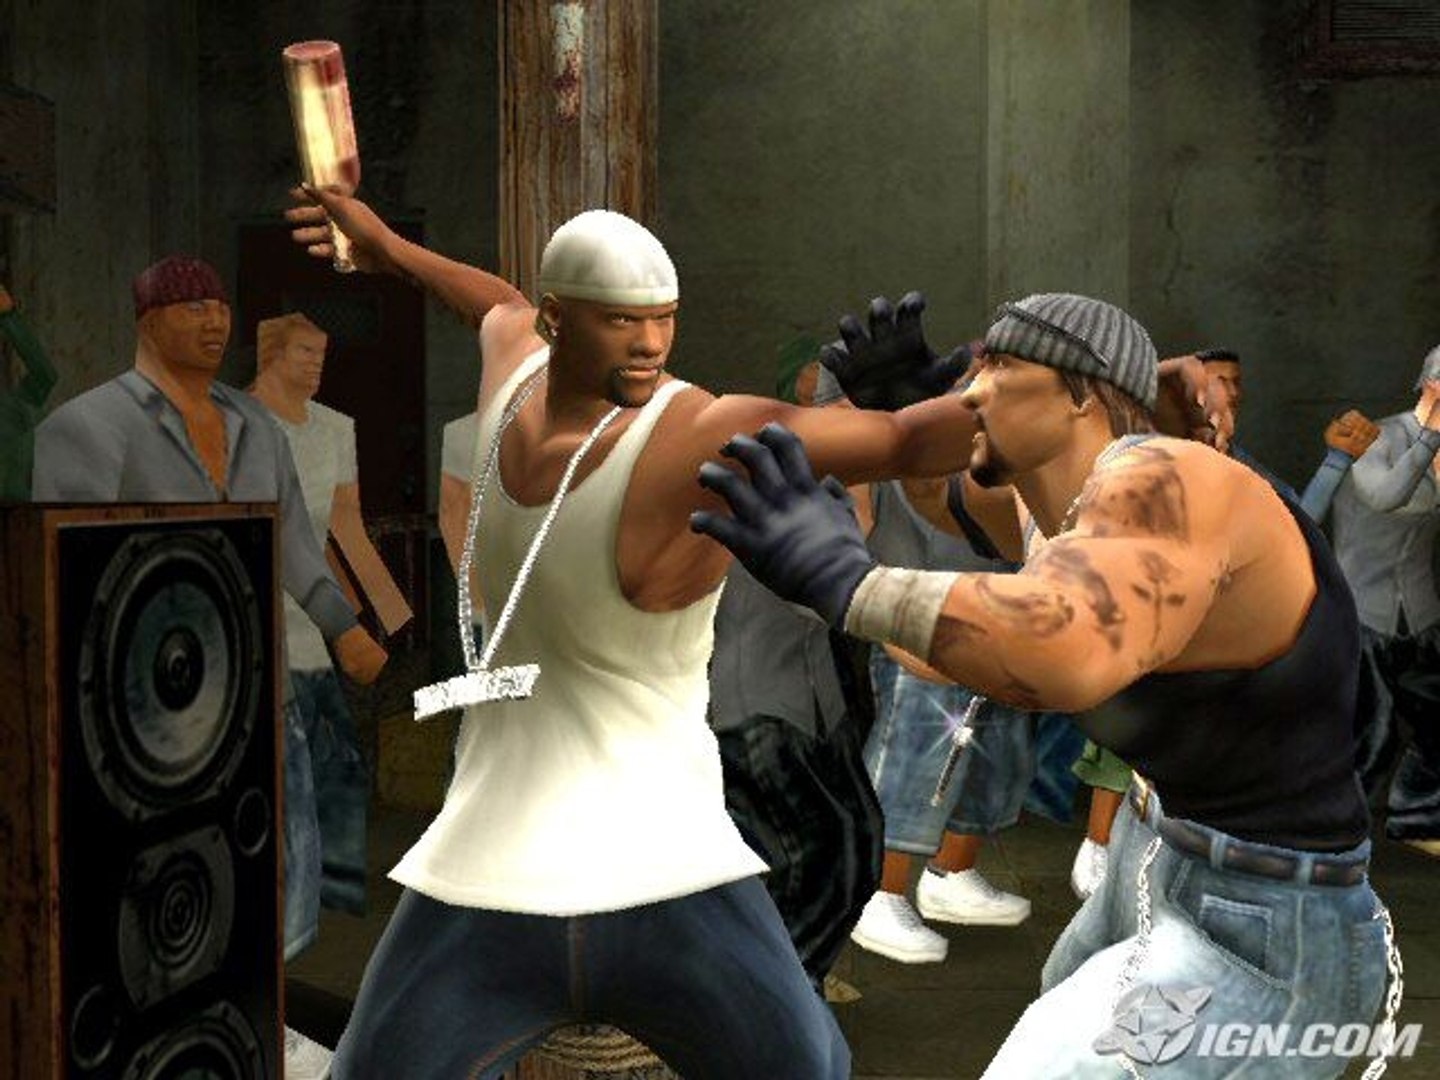 Def Jam Fight for NY: The Takeover - IGN